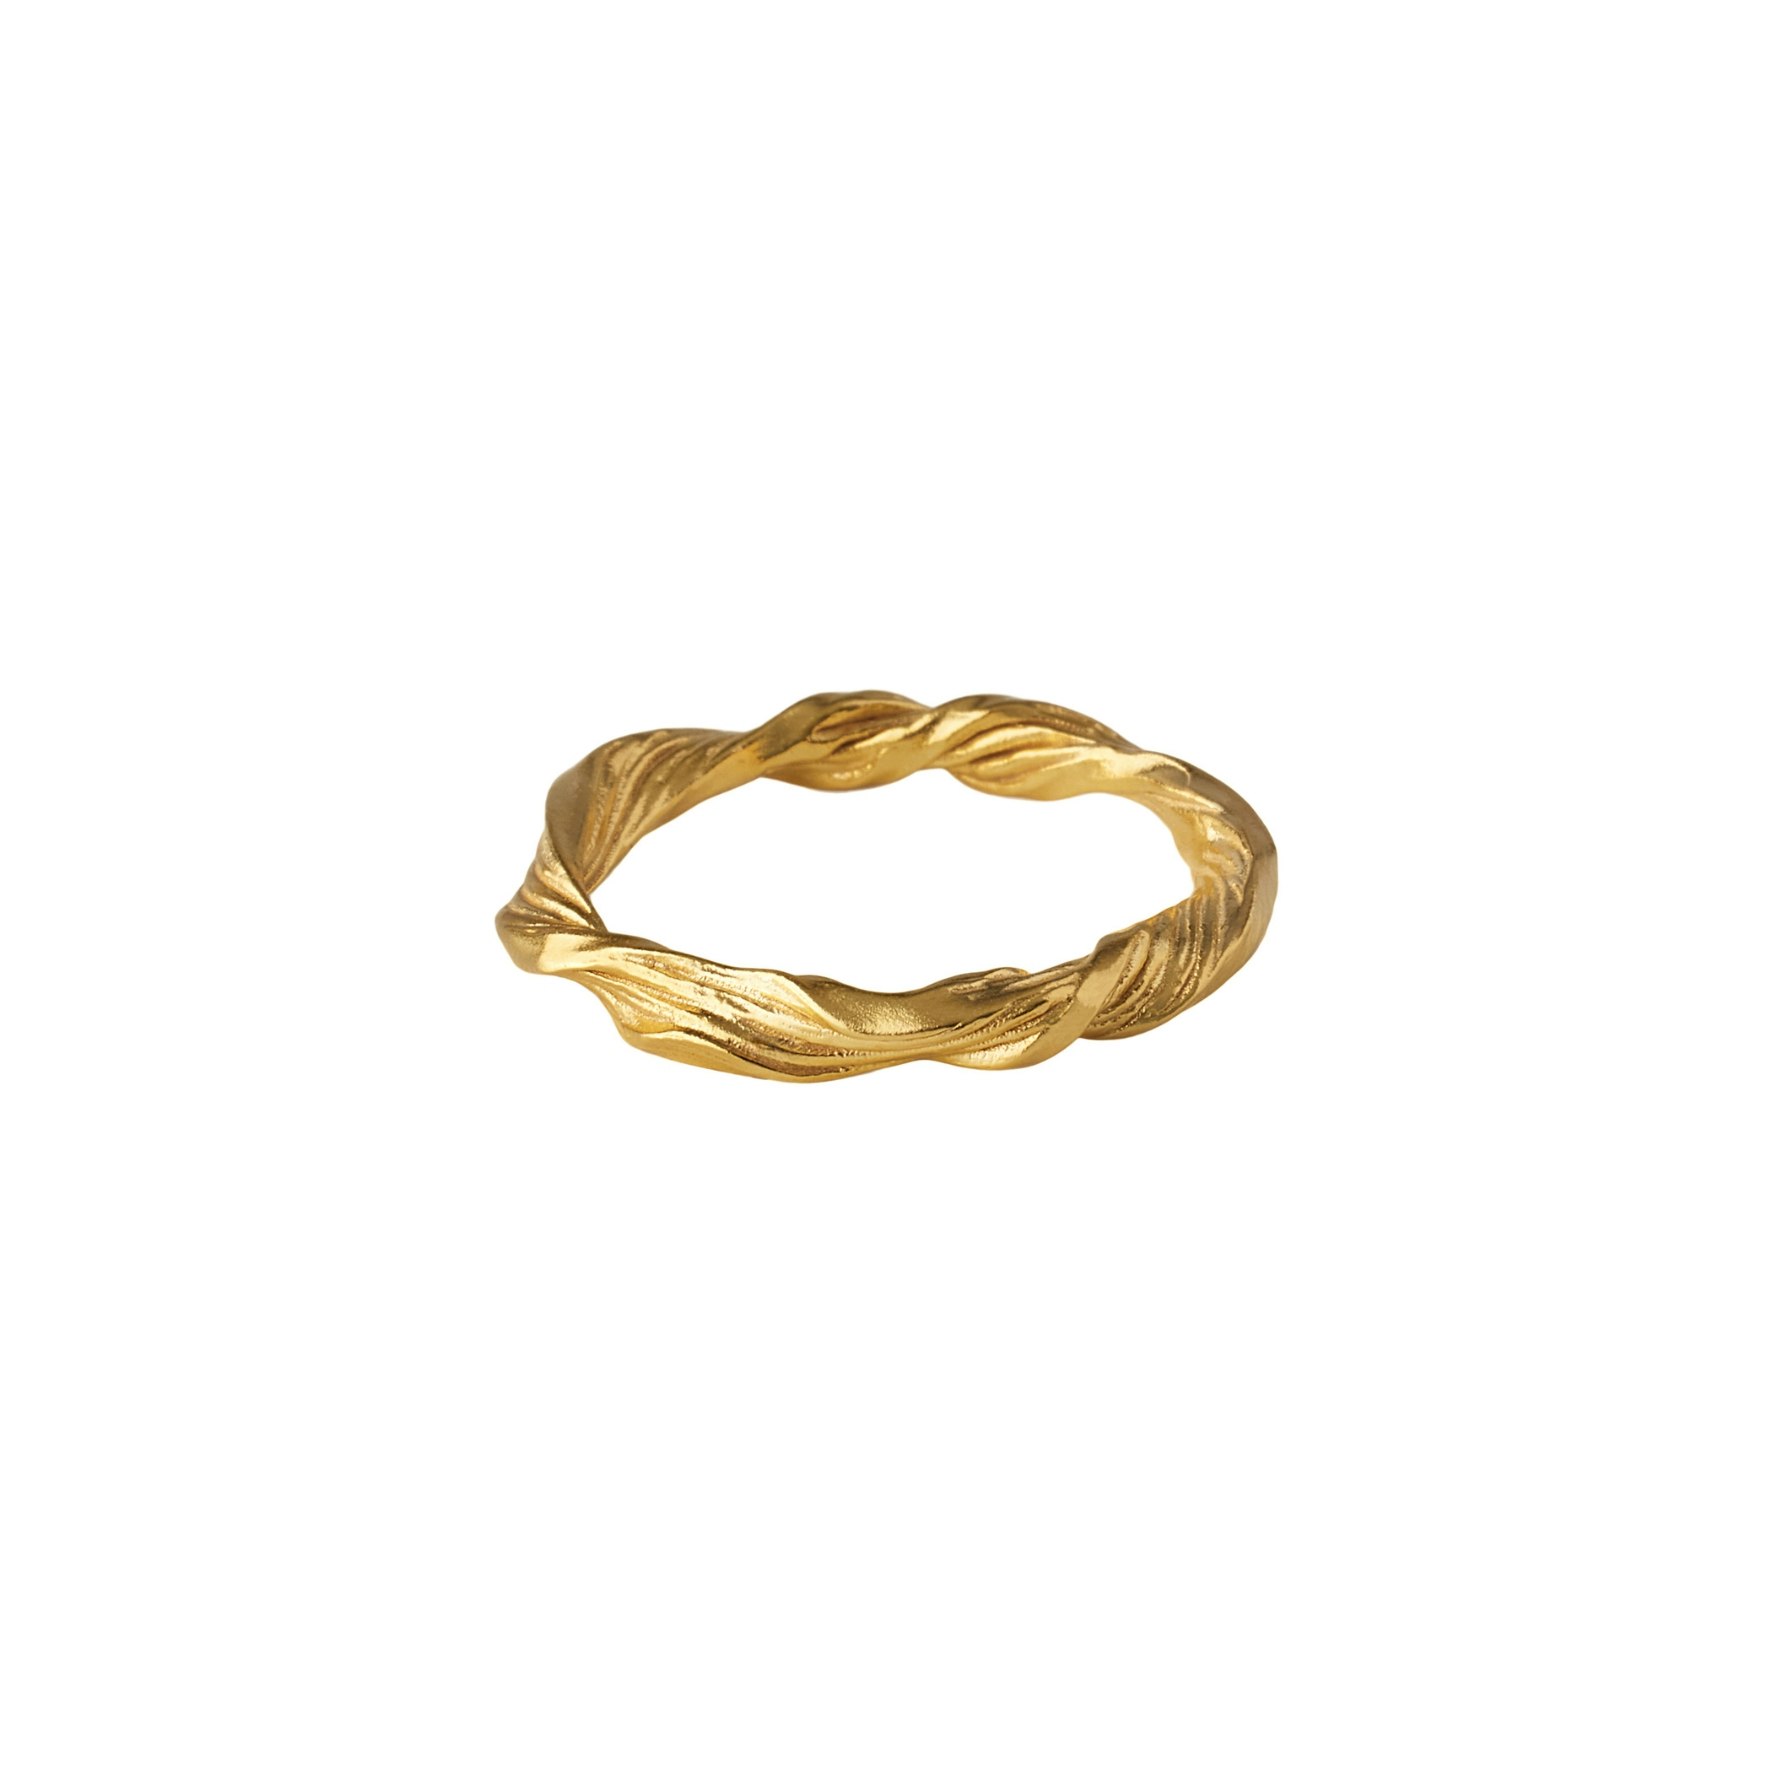 Dancing Wave Ring from Pernille Corydon in Goldplated-Silver Sterling 925